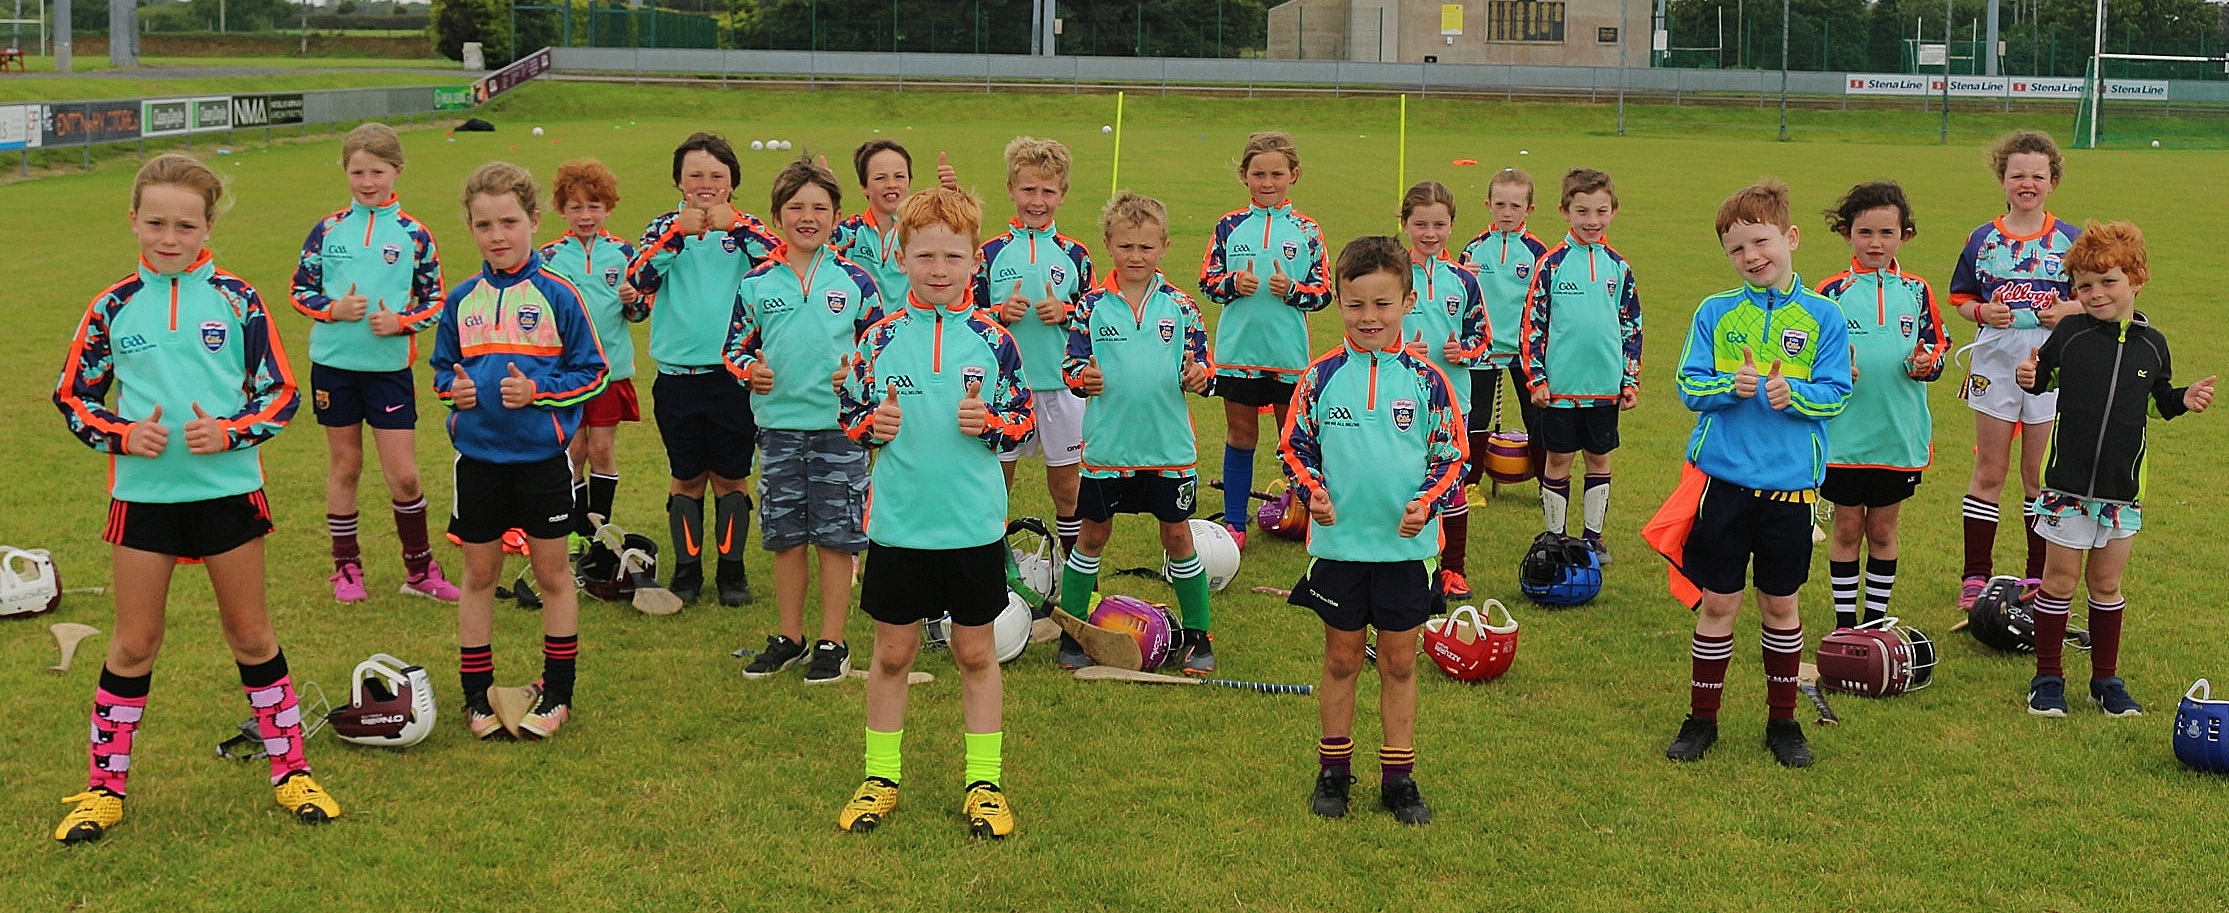 Week 2 Kelloggs Cúl Camps, Over 900 Wexford GAA Kids enjoy another fun packed 5 days